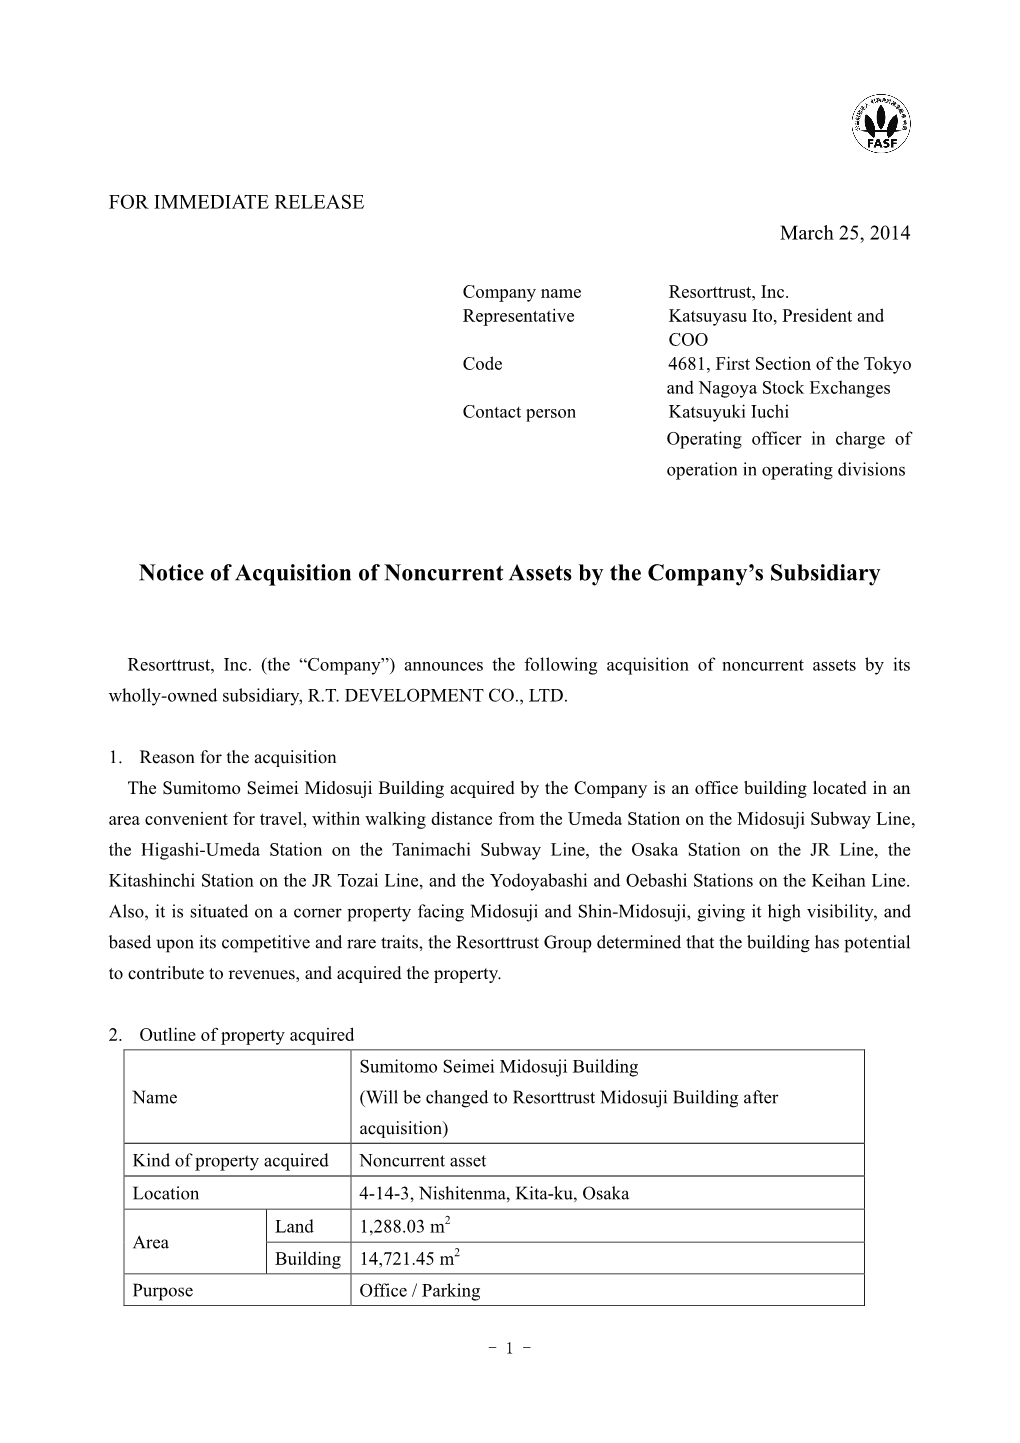 Notice of Acquisition of Noncurrent Assets by the Company's Subsidiary